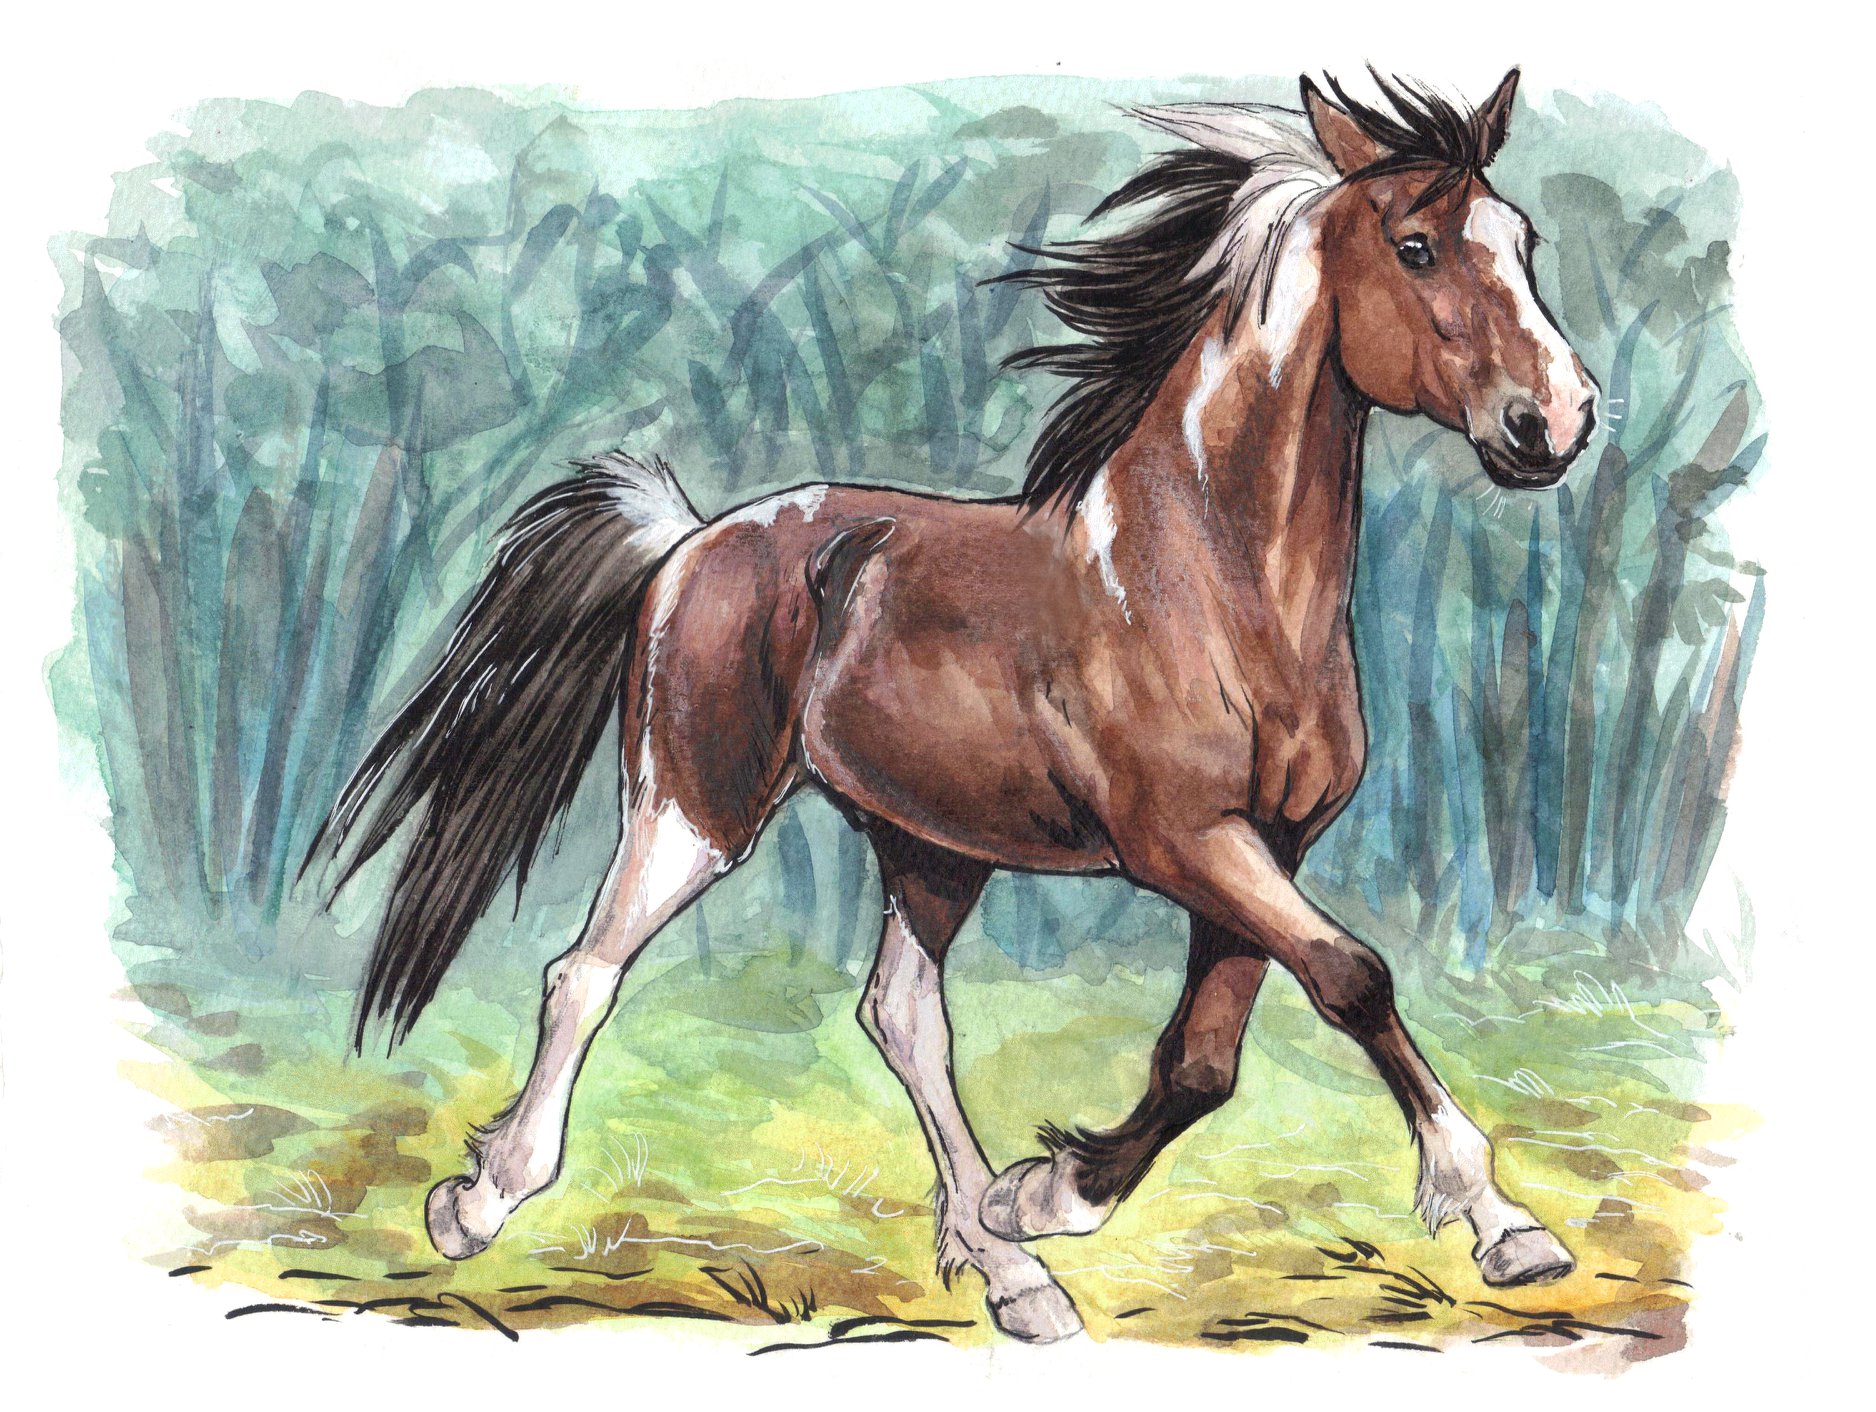 How To Draw A Running Horse, Step by Step, Drawing Guide, by Dawn - DragoArt